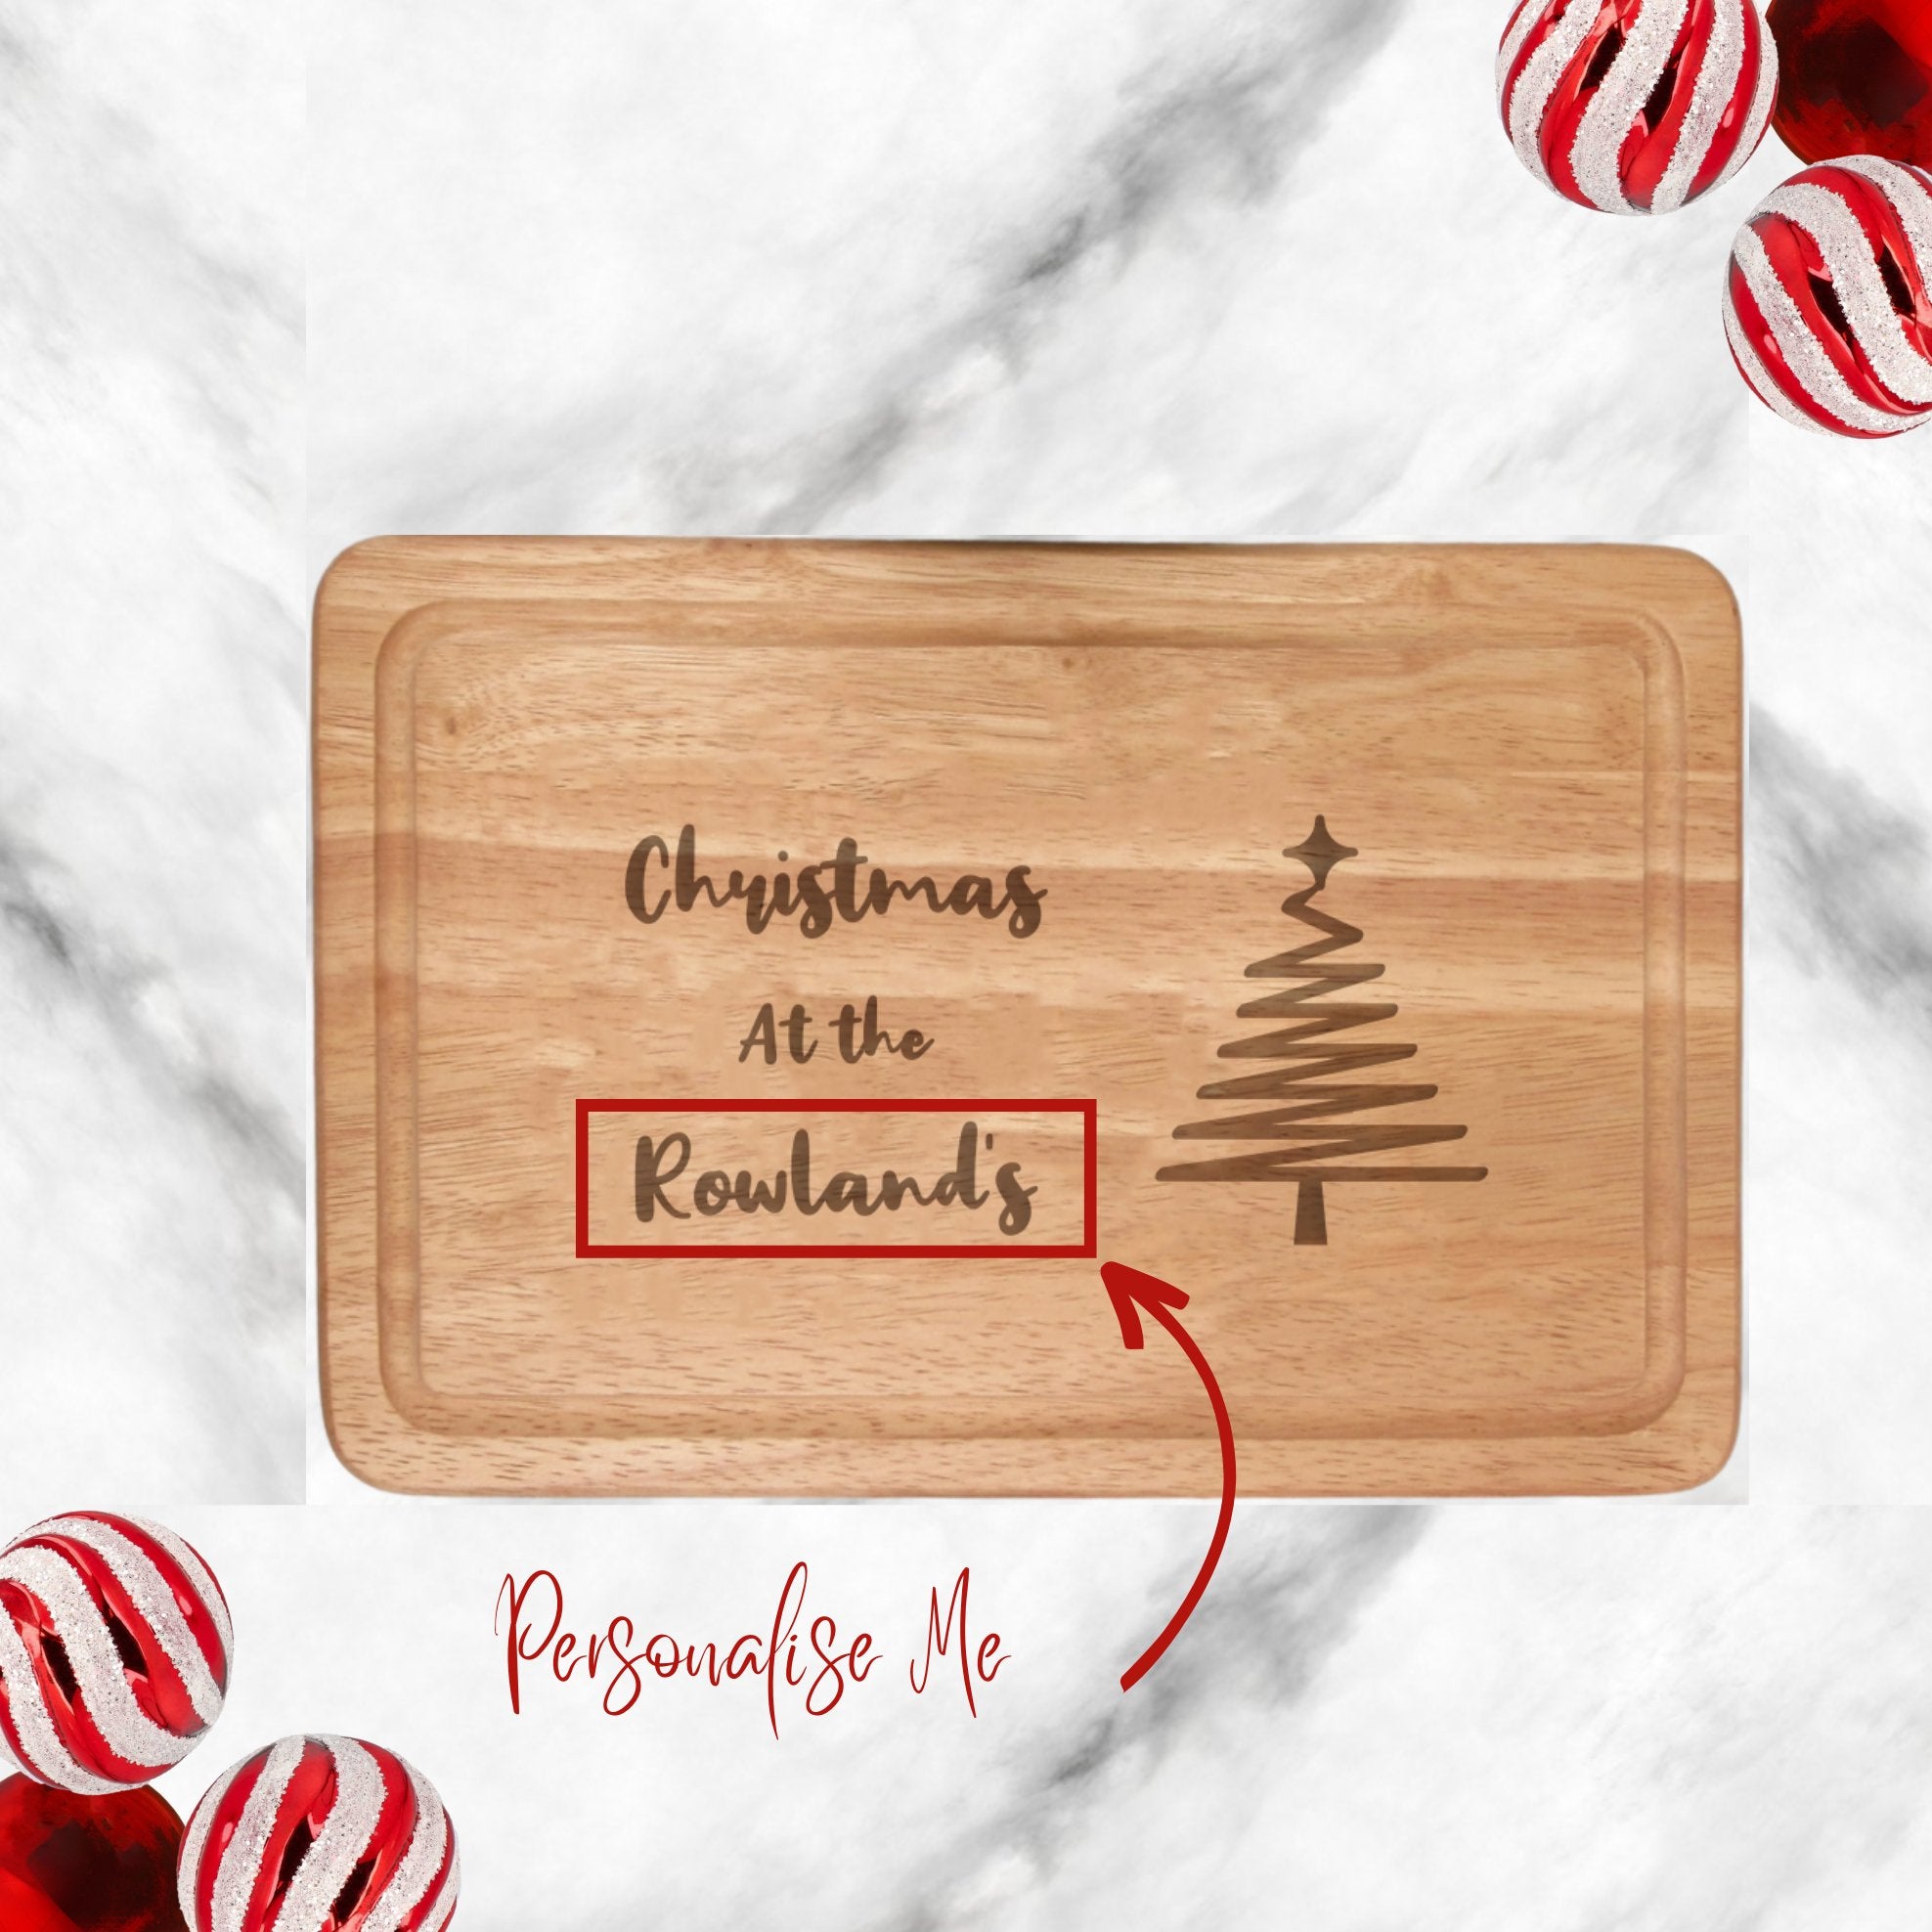 Elevate your kitchen ambiance or share the love with our Personalised Chopping Board - Knife & Fork Design. Expertly laser-engraved on Beech Wood, personalize yours today for a unique touch—all text in caps. Order now to infuse your celebrations with the magic of personalization. Measures 300mm x 200mm. Please note: Hand wash only, not dishwasher safe. 📦❤️